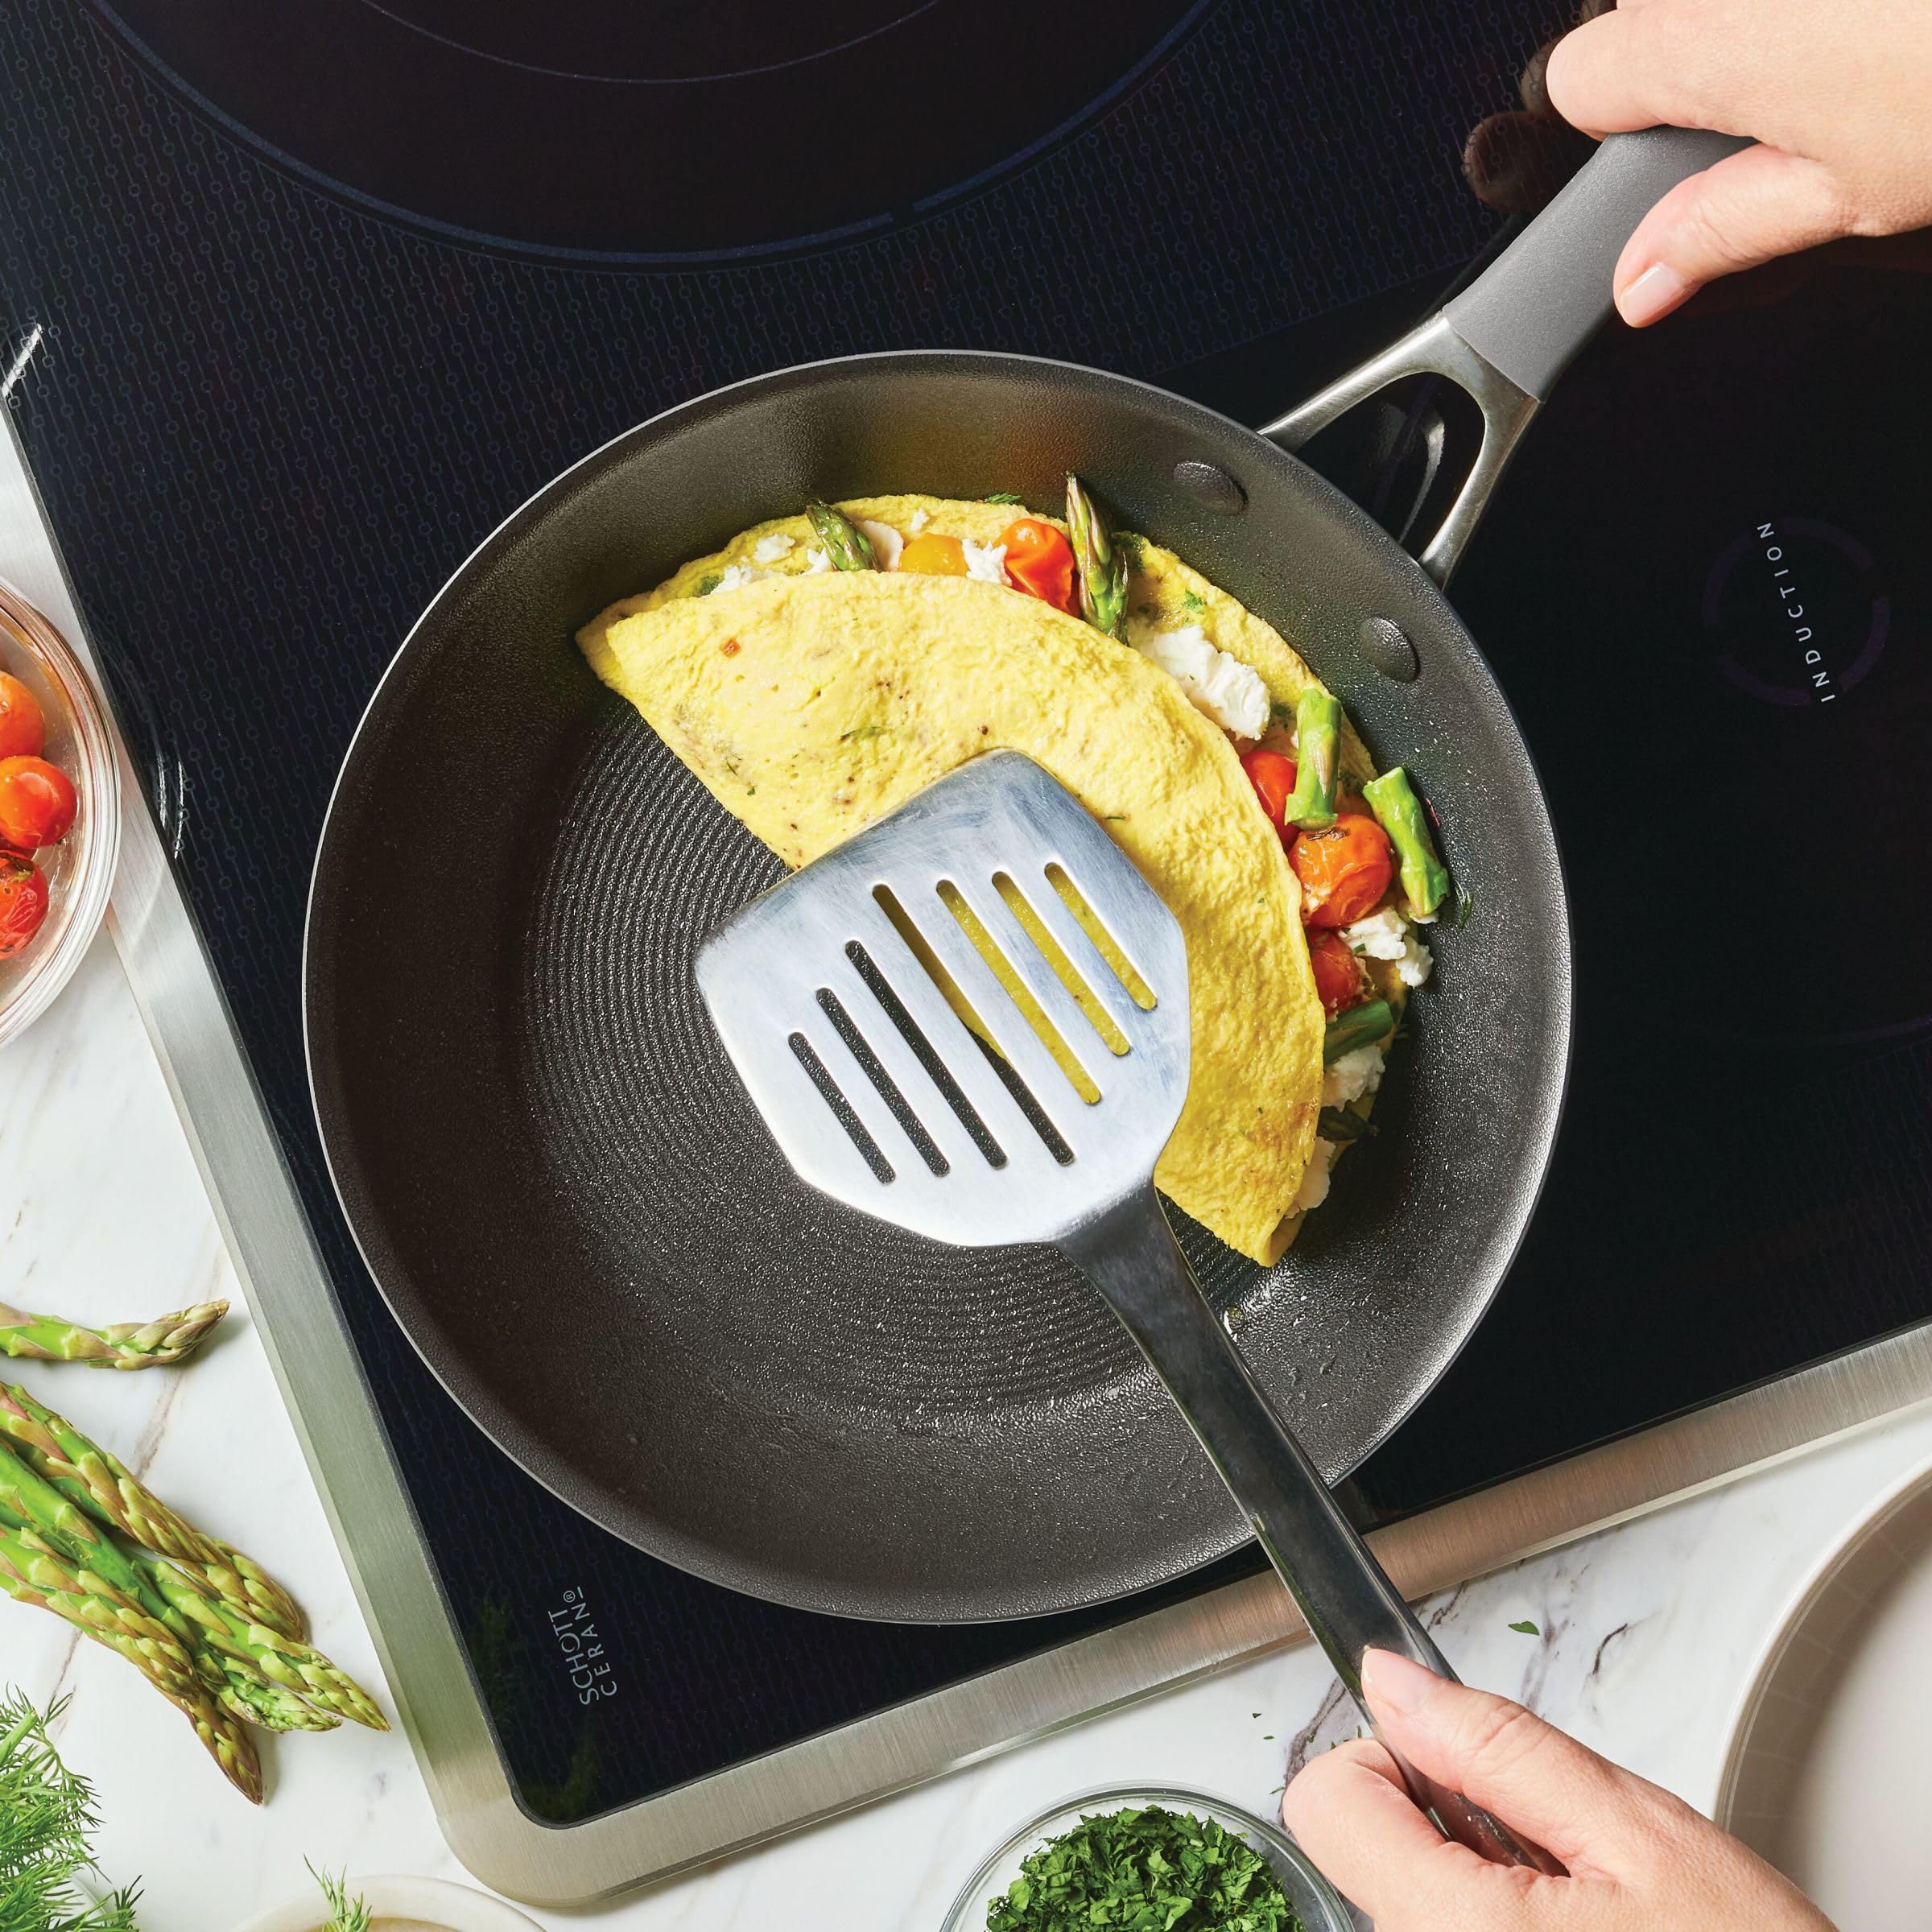 Circulon A1 Series with ScratchDefense Technology Nonstick Induction Frying Pans/Skillet Set, 8.5 Inch and 10 Inch - Graphite